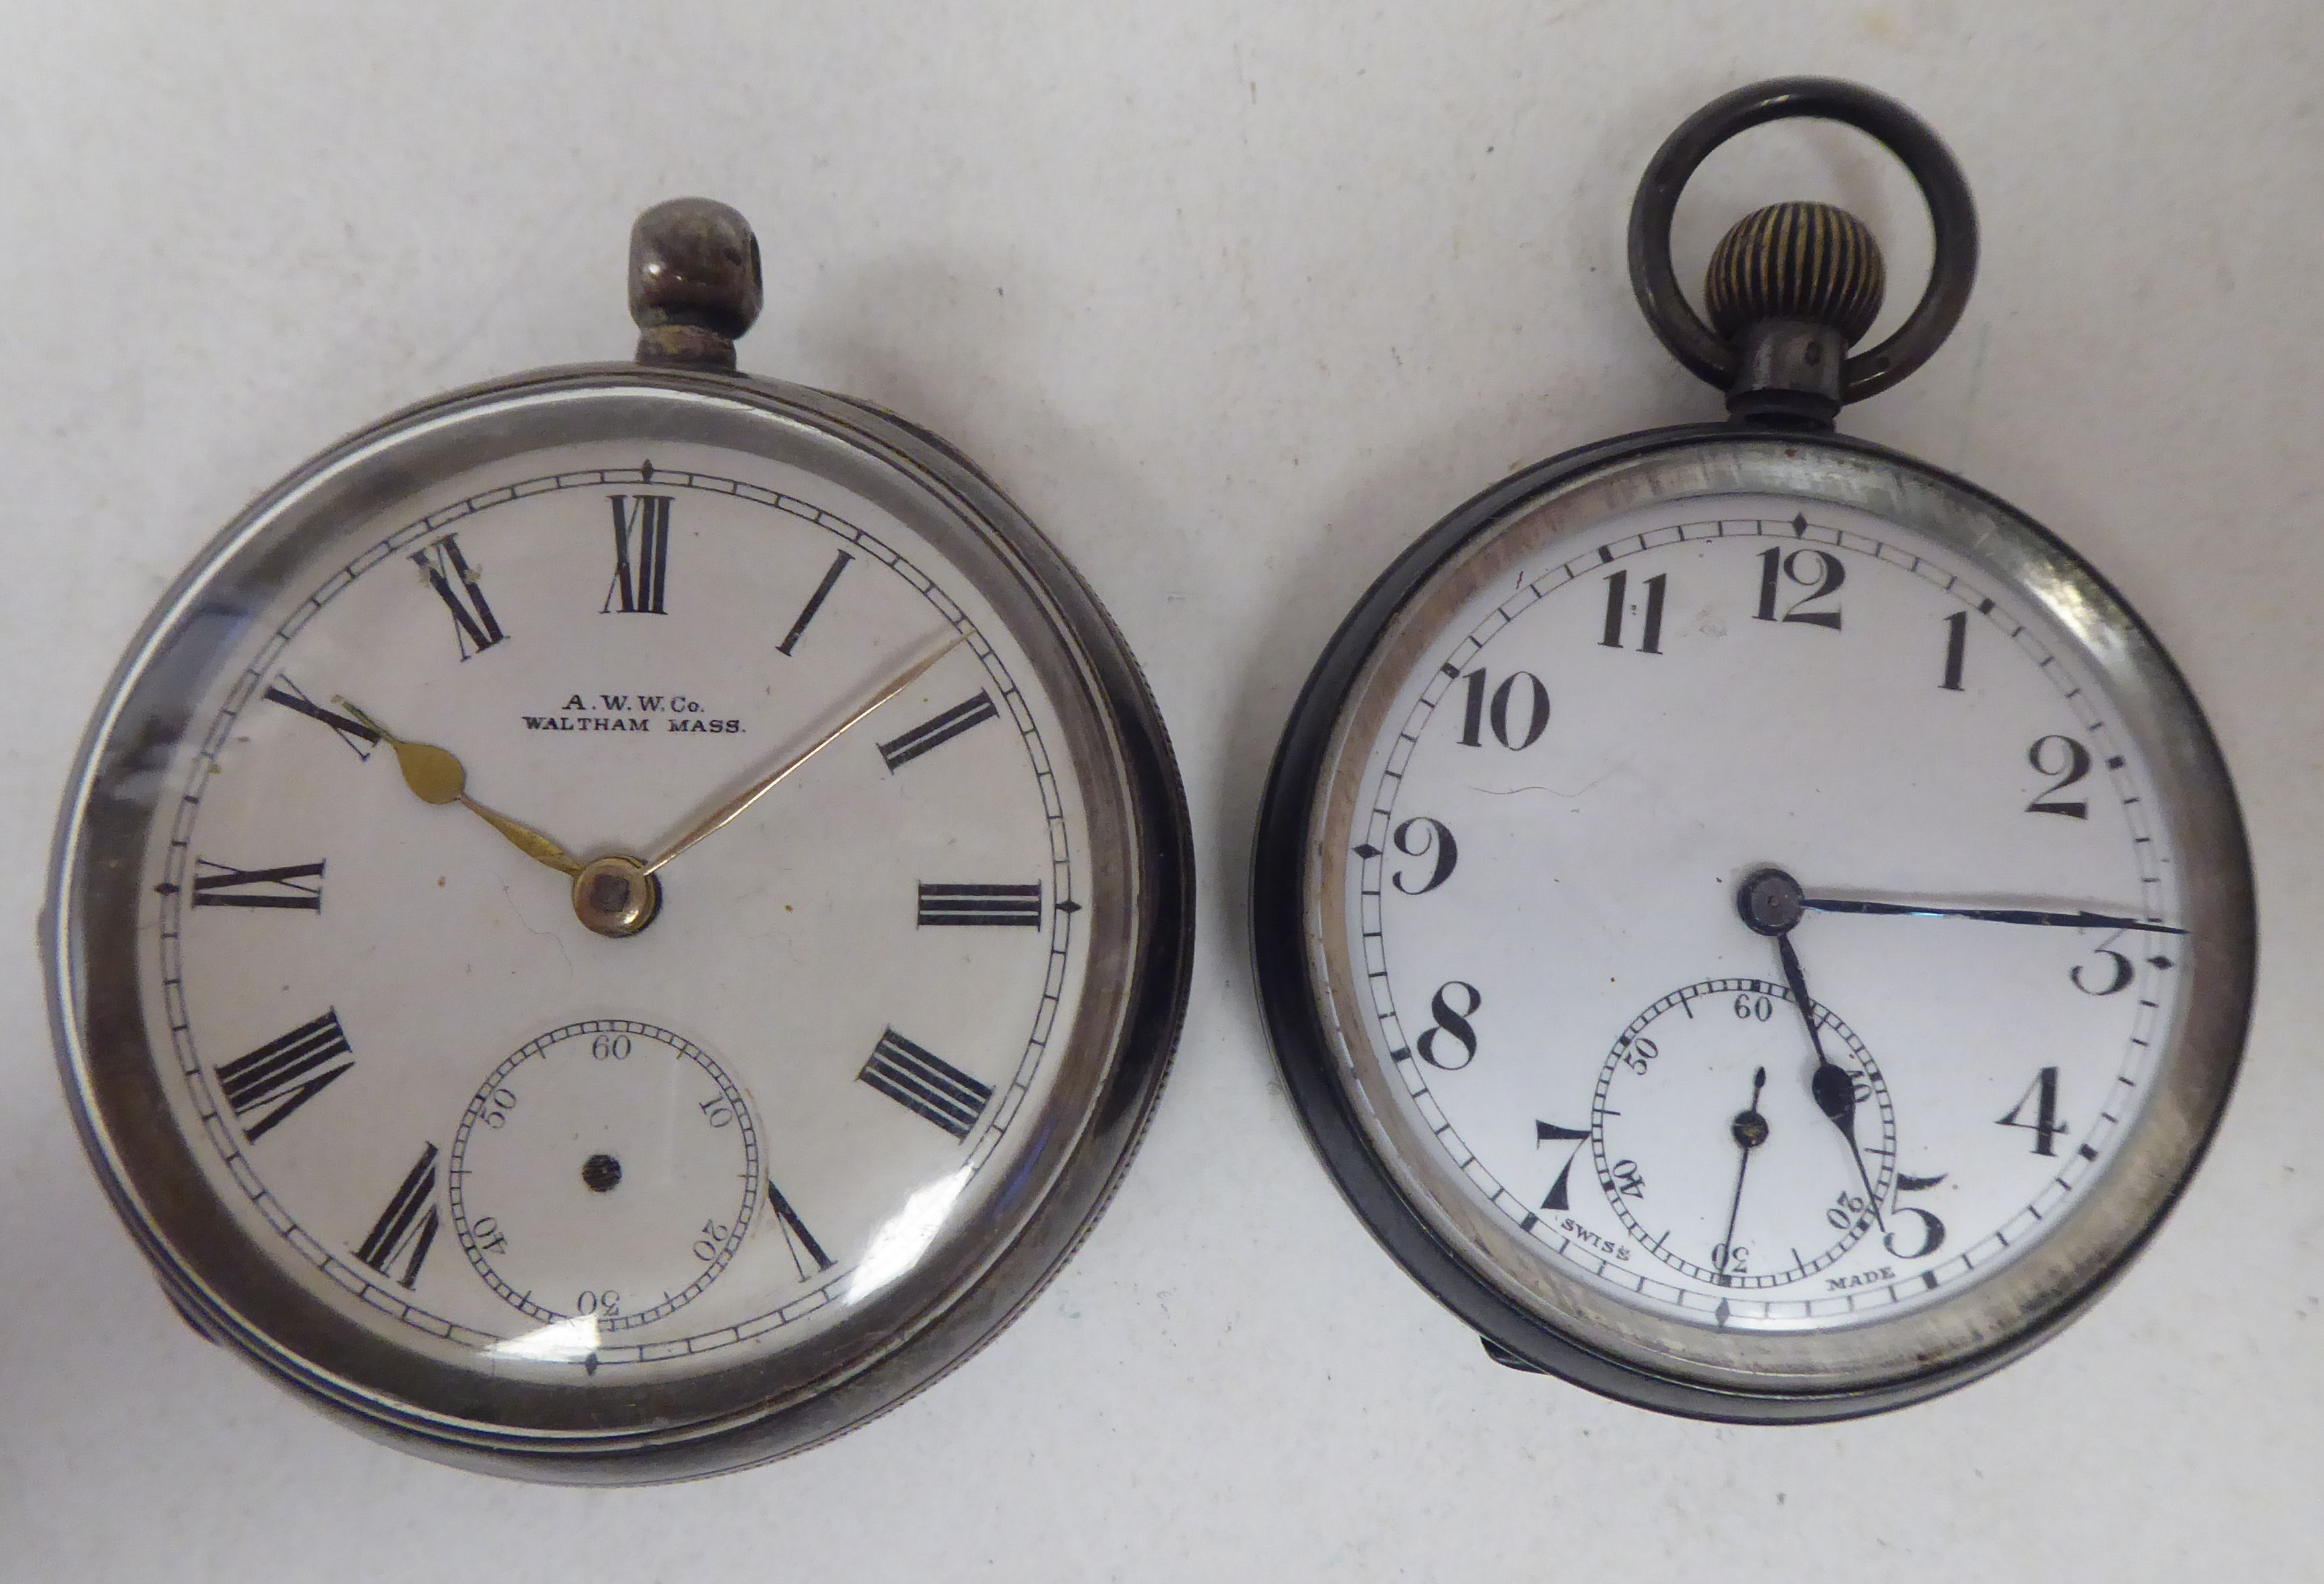 A Waltham silver cased pocketwatch, faced by a Roman dial; and another, faced by an Arabic dial